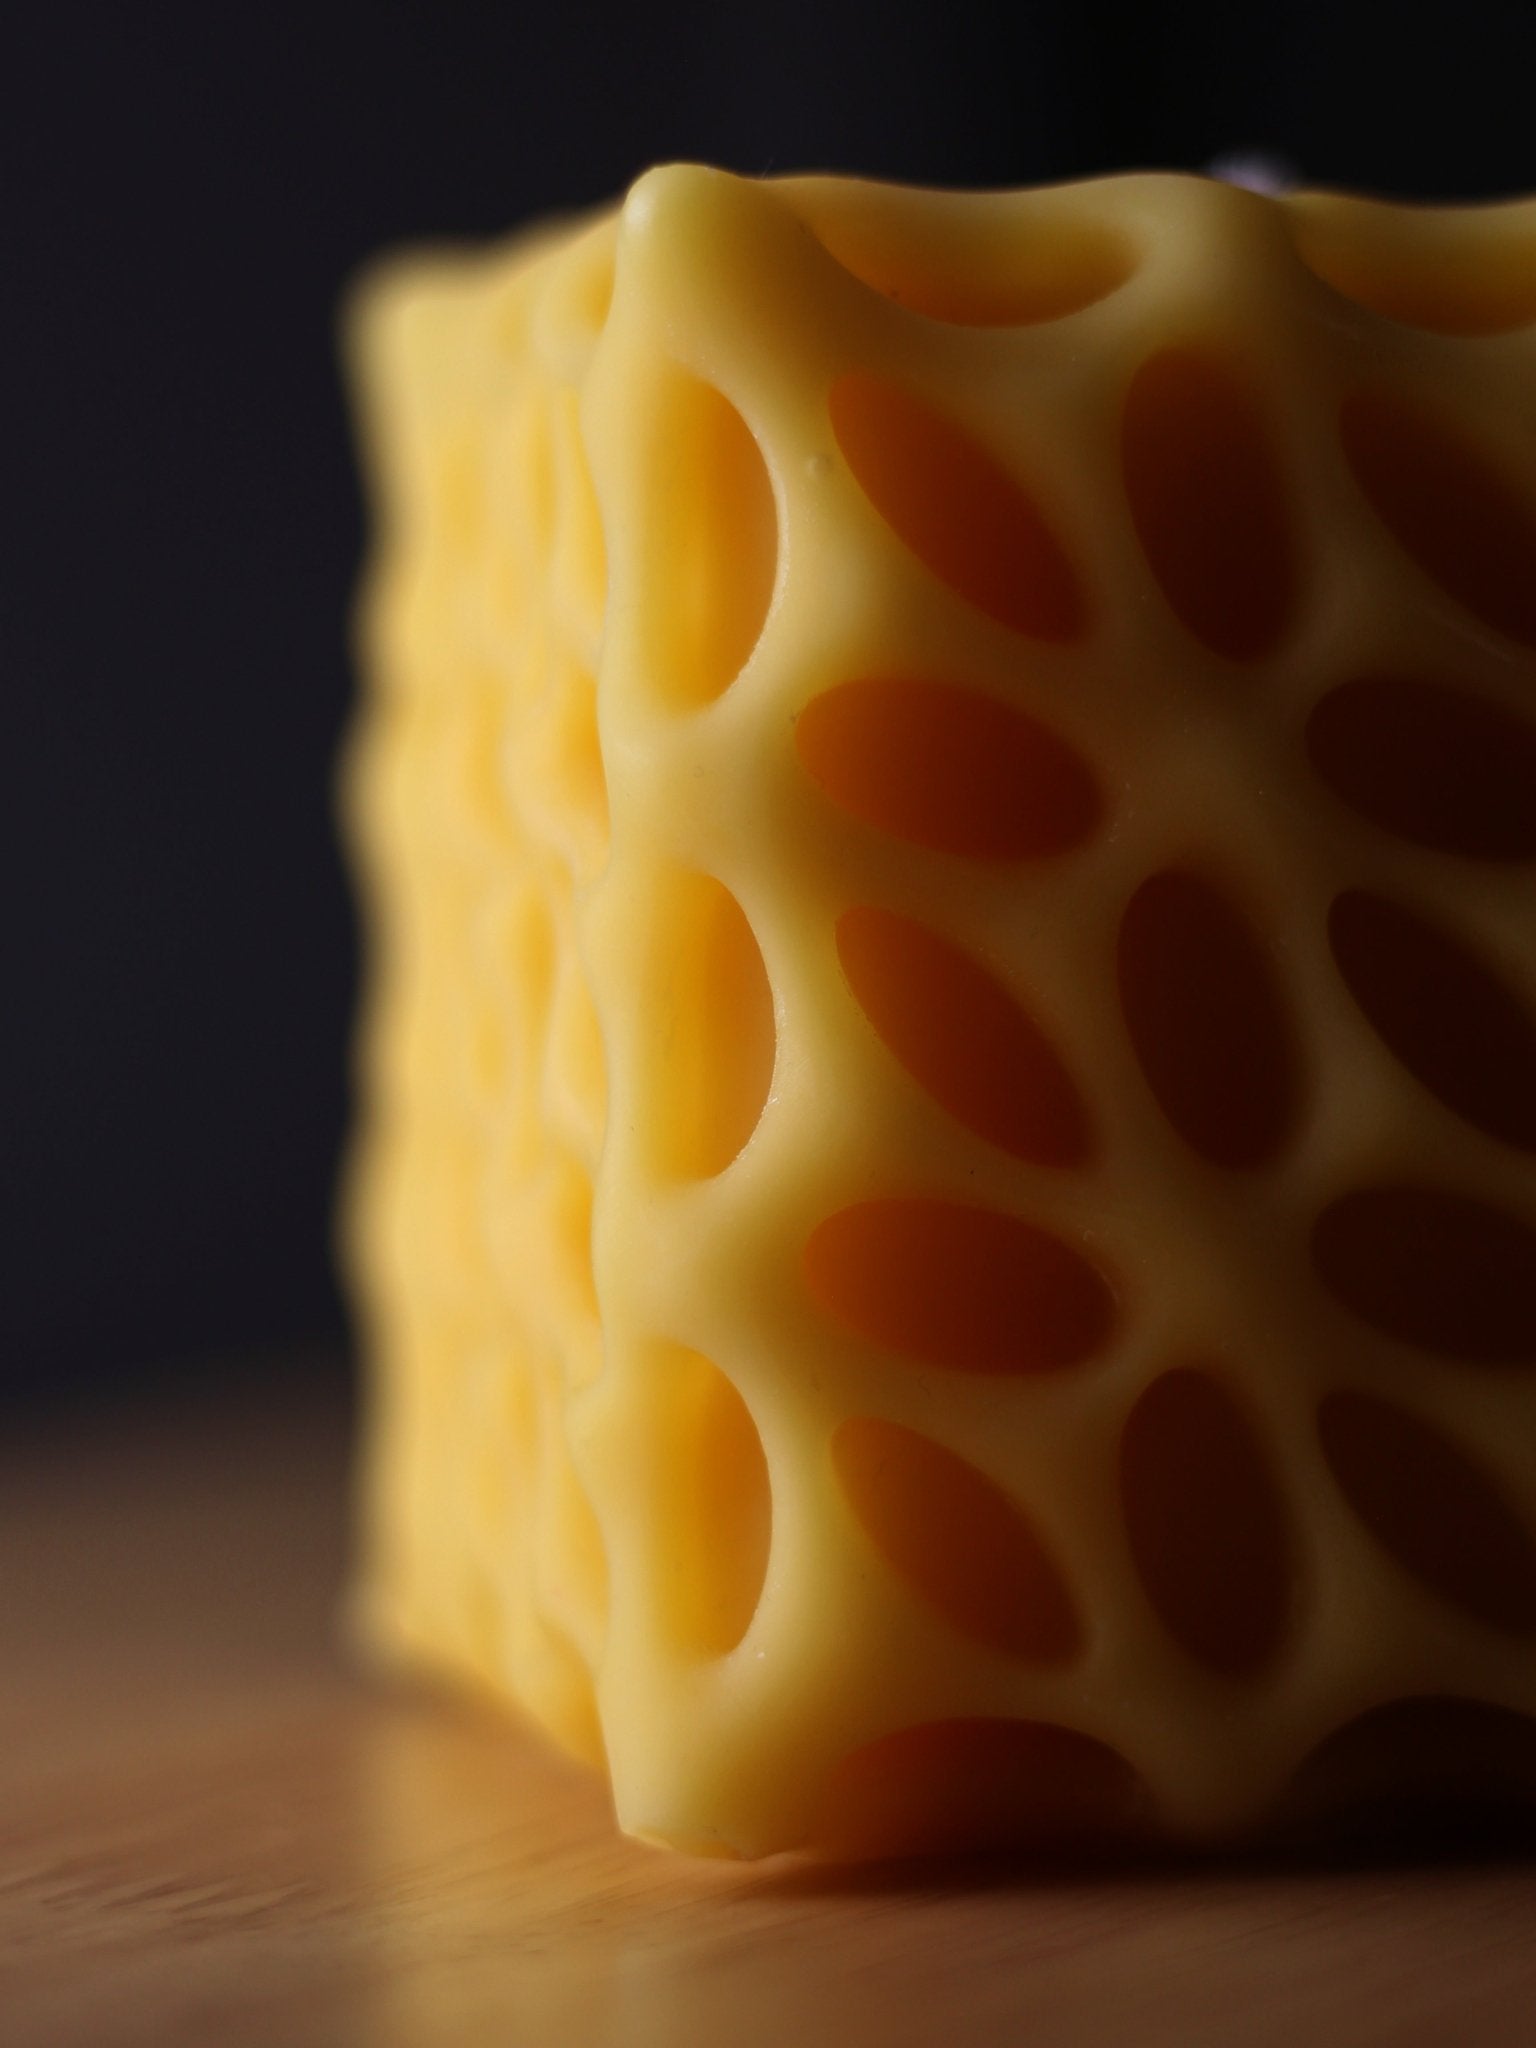 Beeswax Pillar Candles - The Hive - BZZWAX